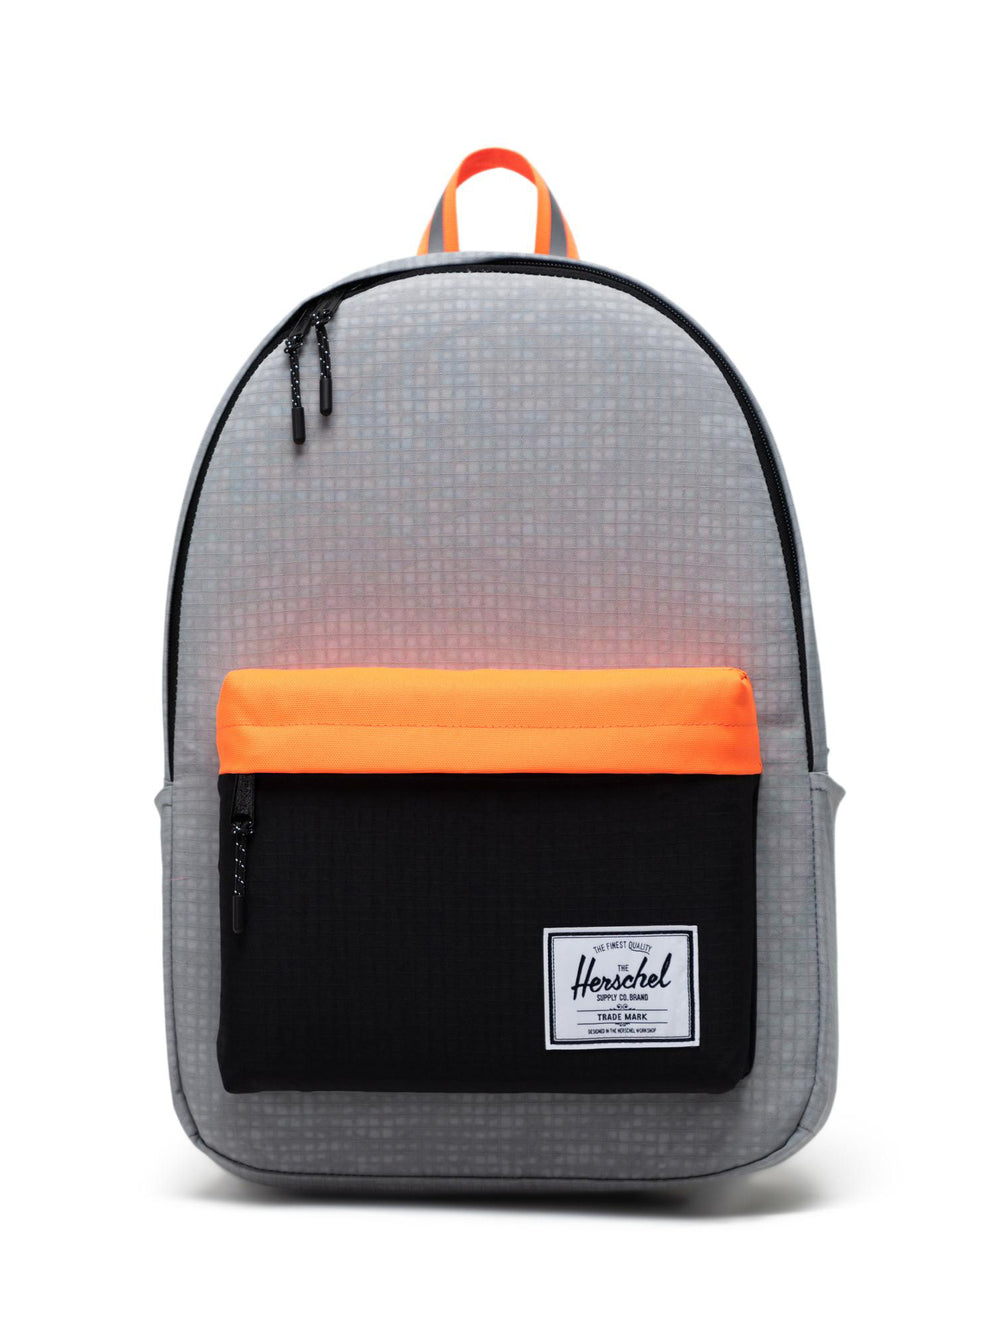 HERSCHEL SUPPLY CO. CLASSIC XL BACKPACK - ENZYME/BLACK - CLEARANCE